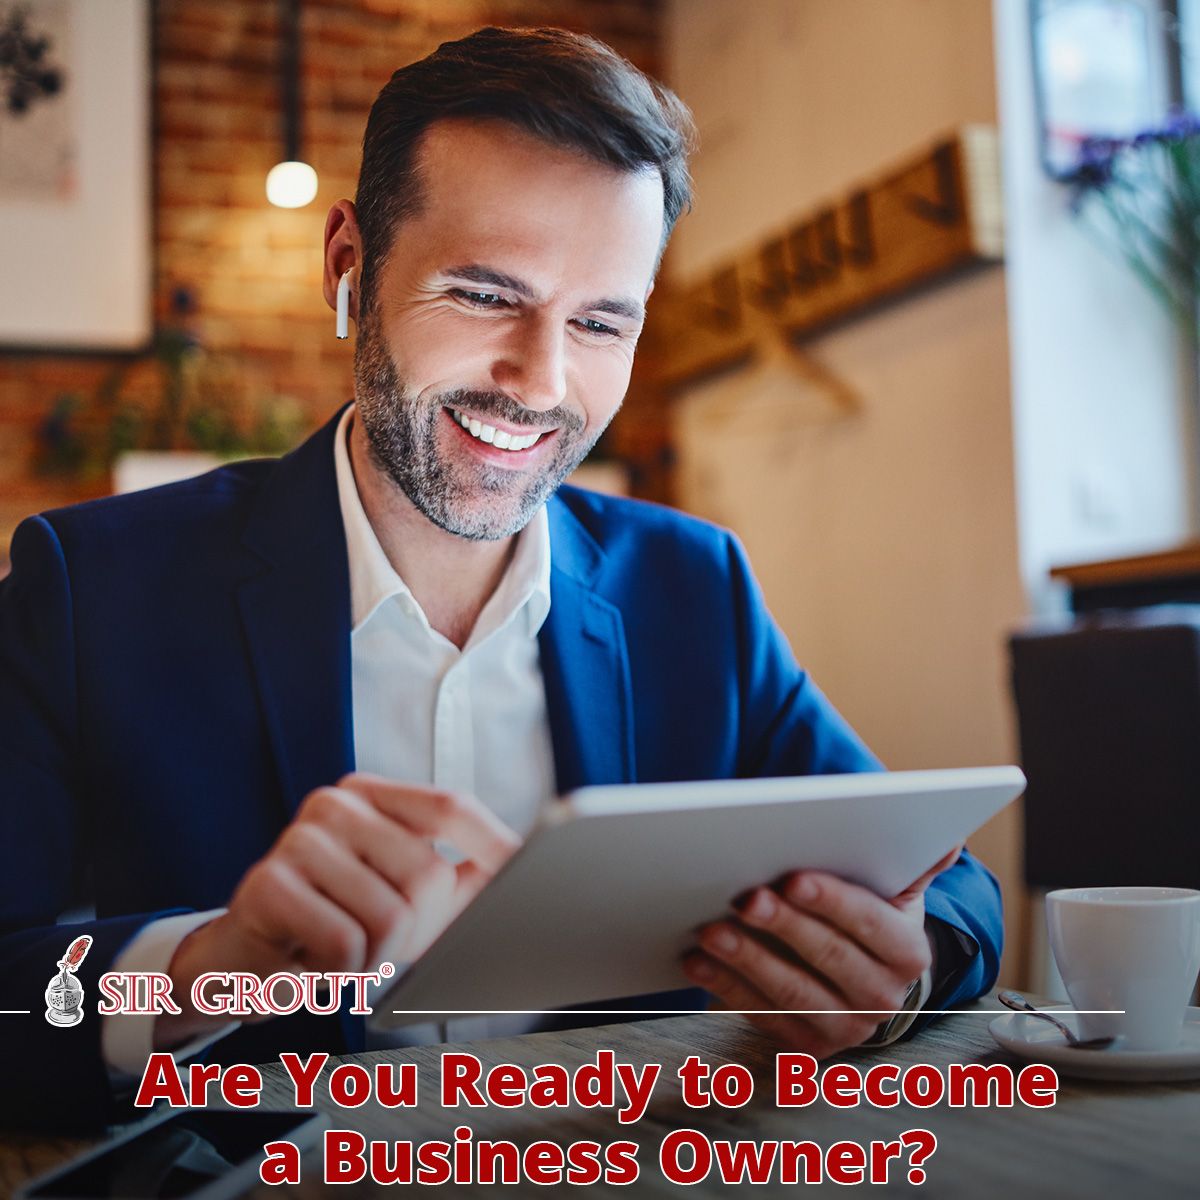 Are You Ready to Become a Business Owner?